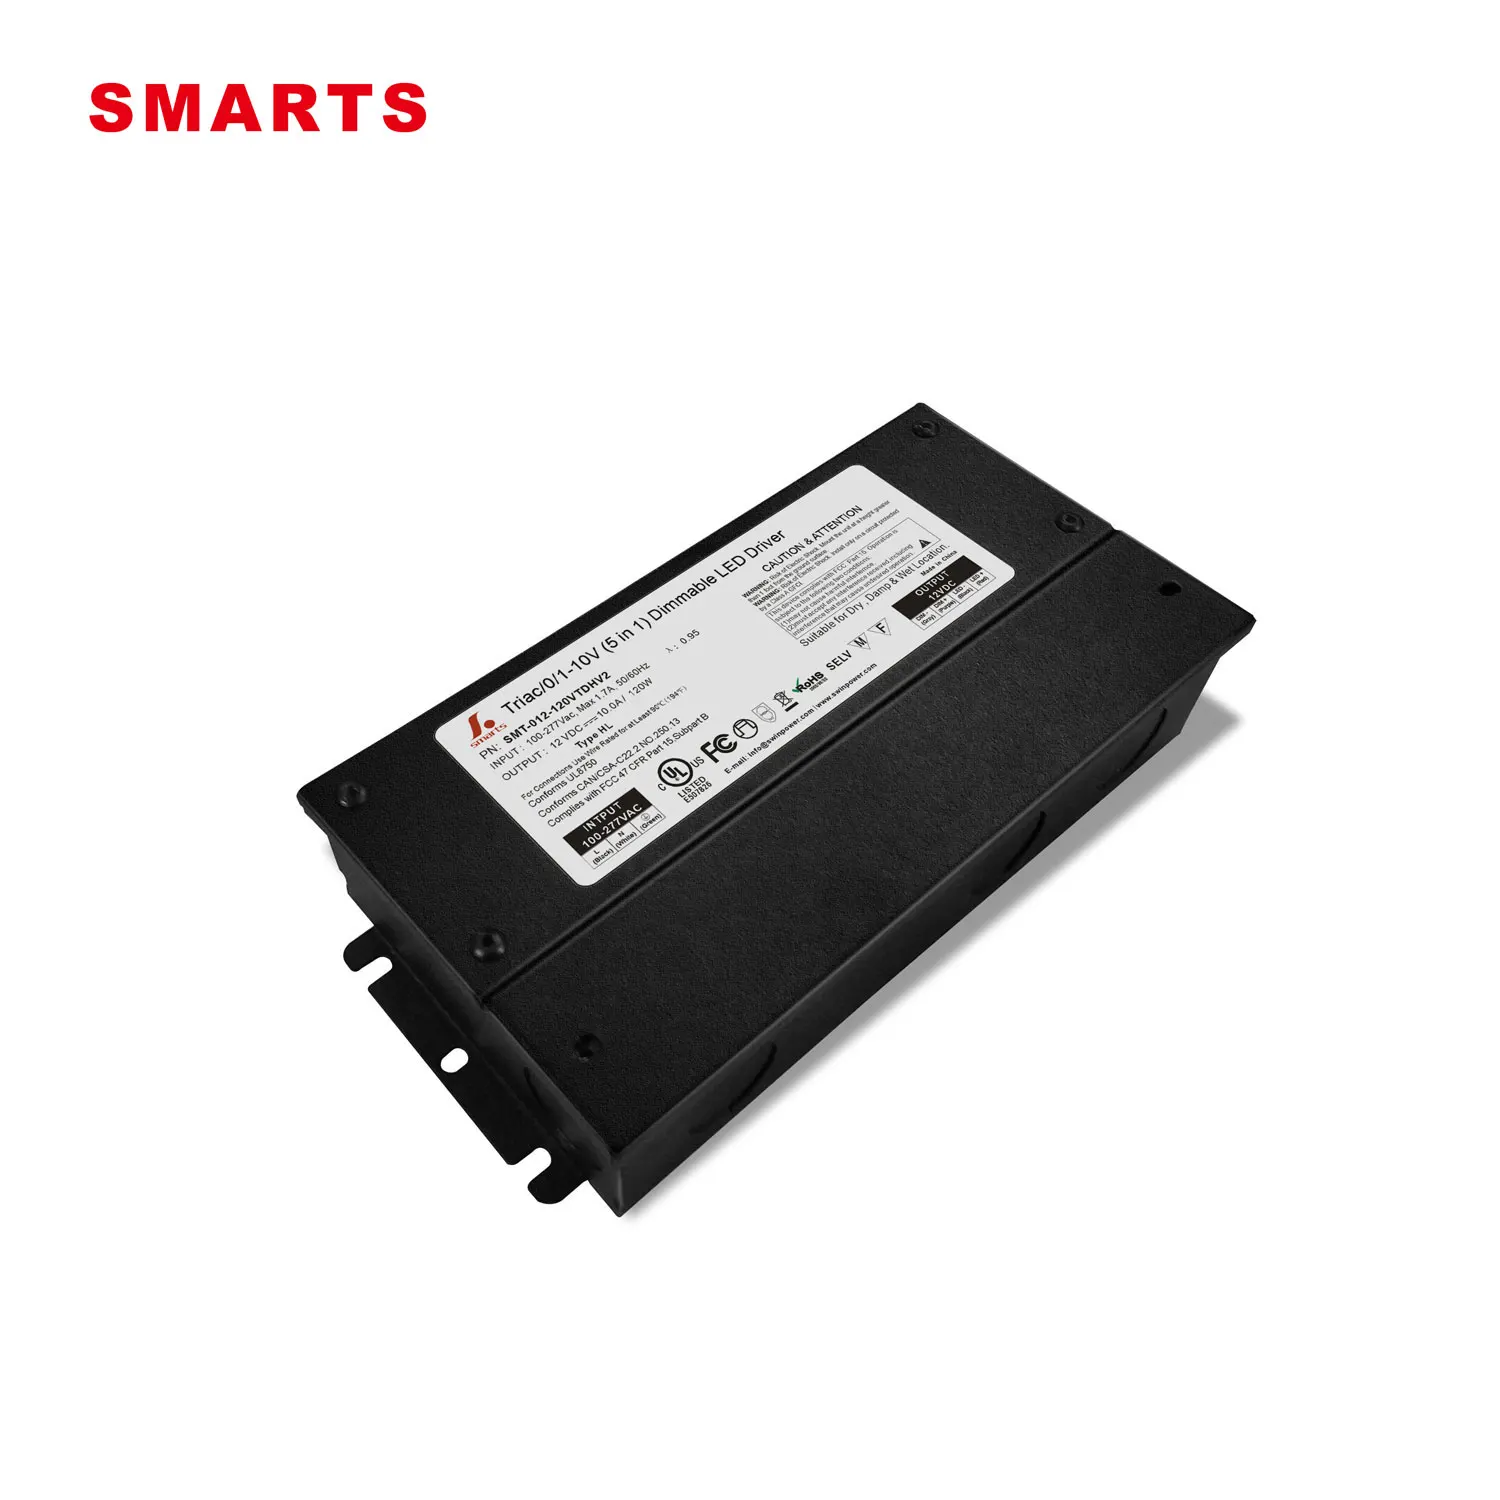 12v 120w constant voltage power supply for Led strip 5 σε 1 dimmable led driver